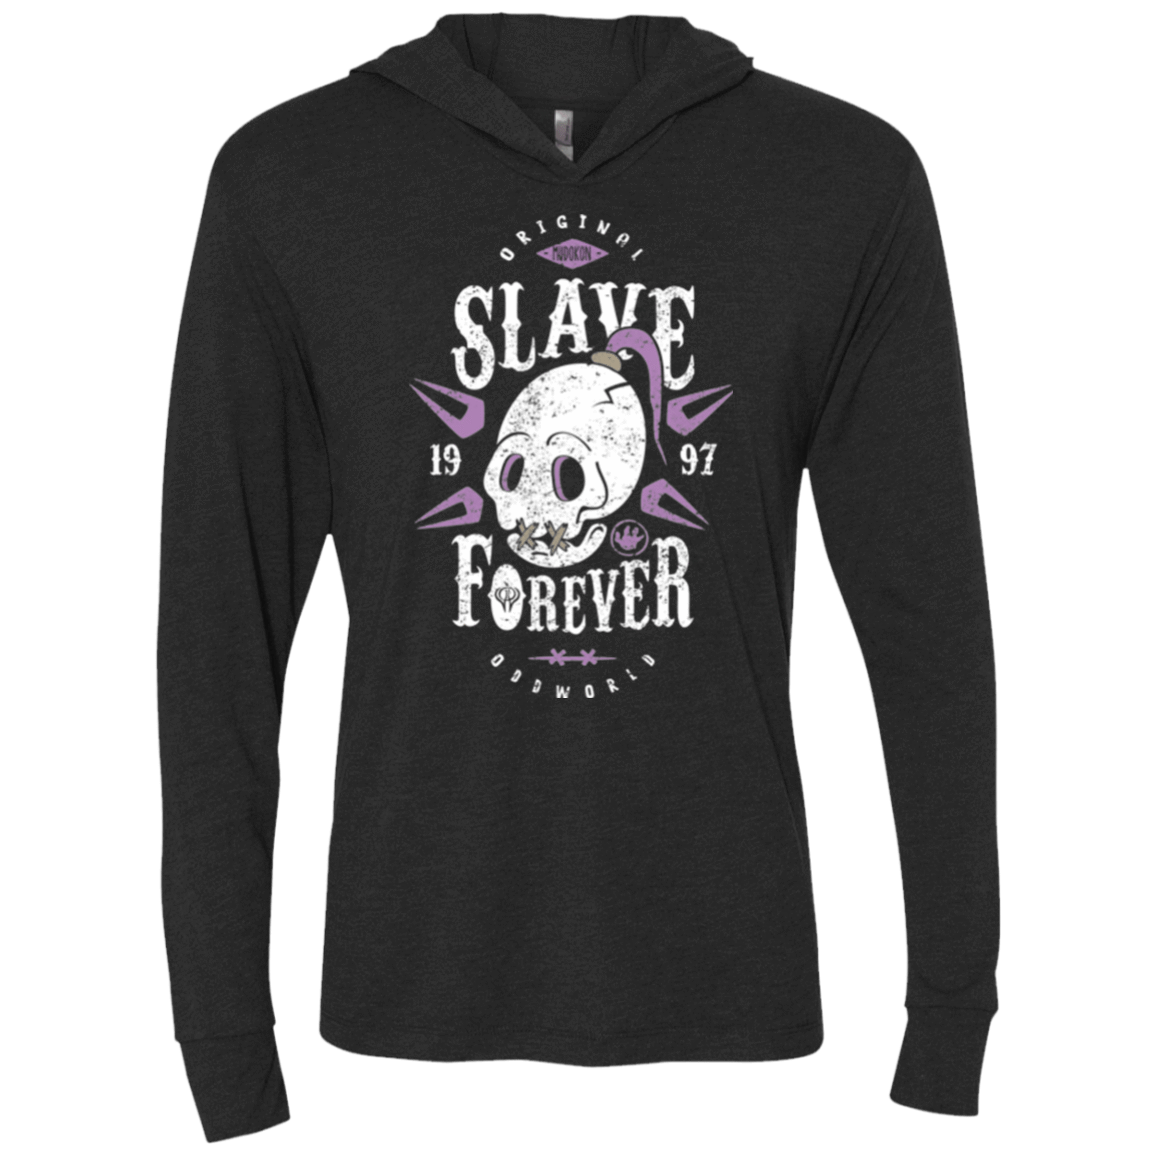 T-Shirts Vintage Black / X-Small Slave Forever Triblend Long Sleeve Hoodie Tee